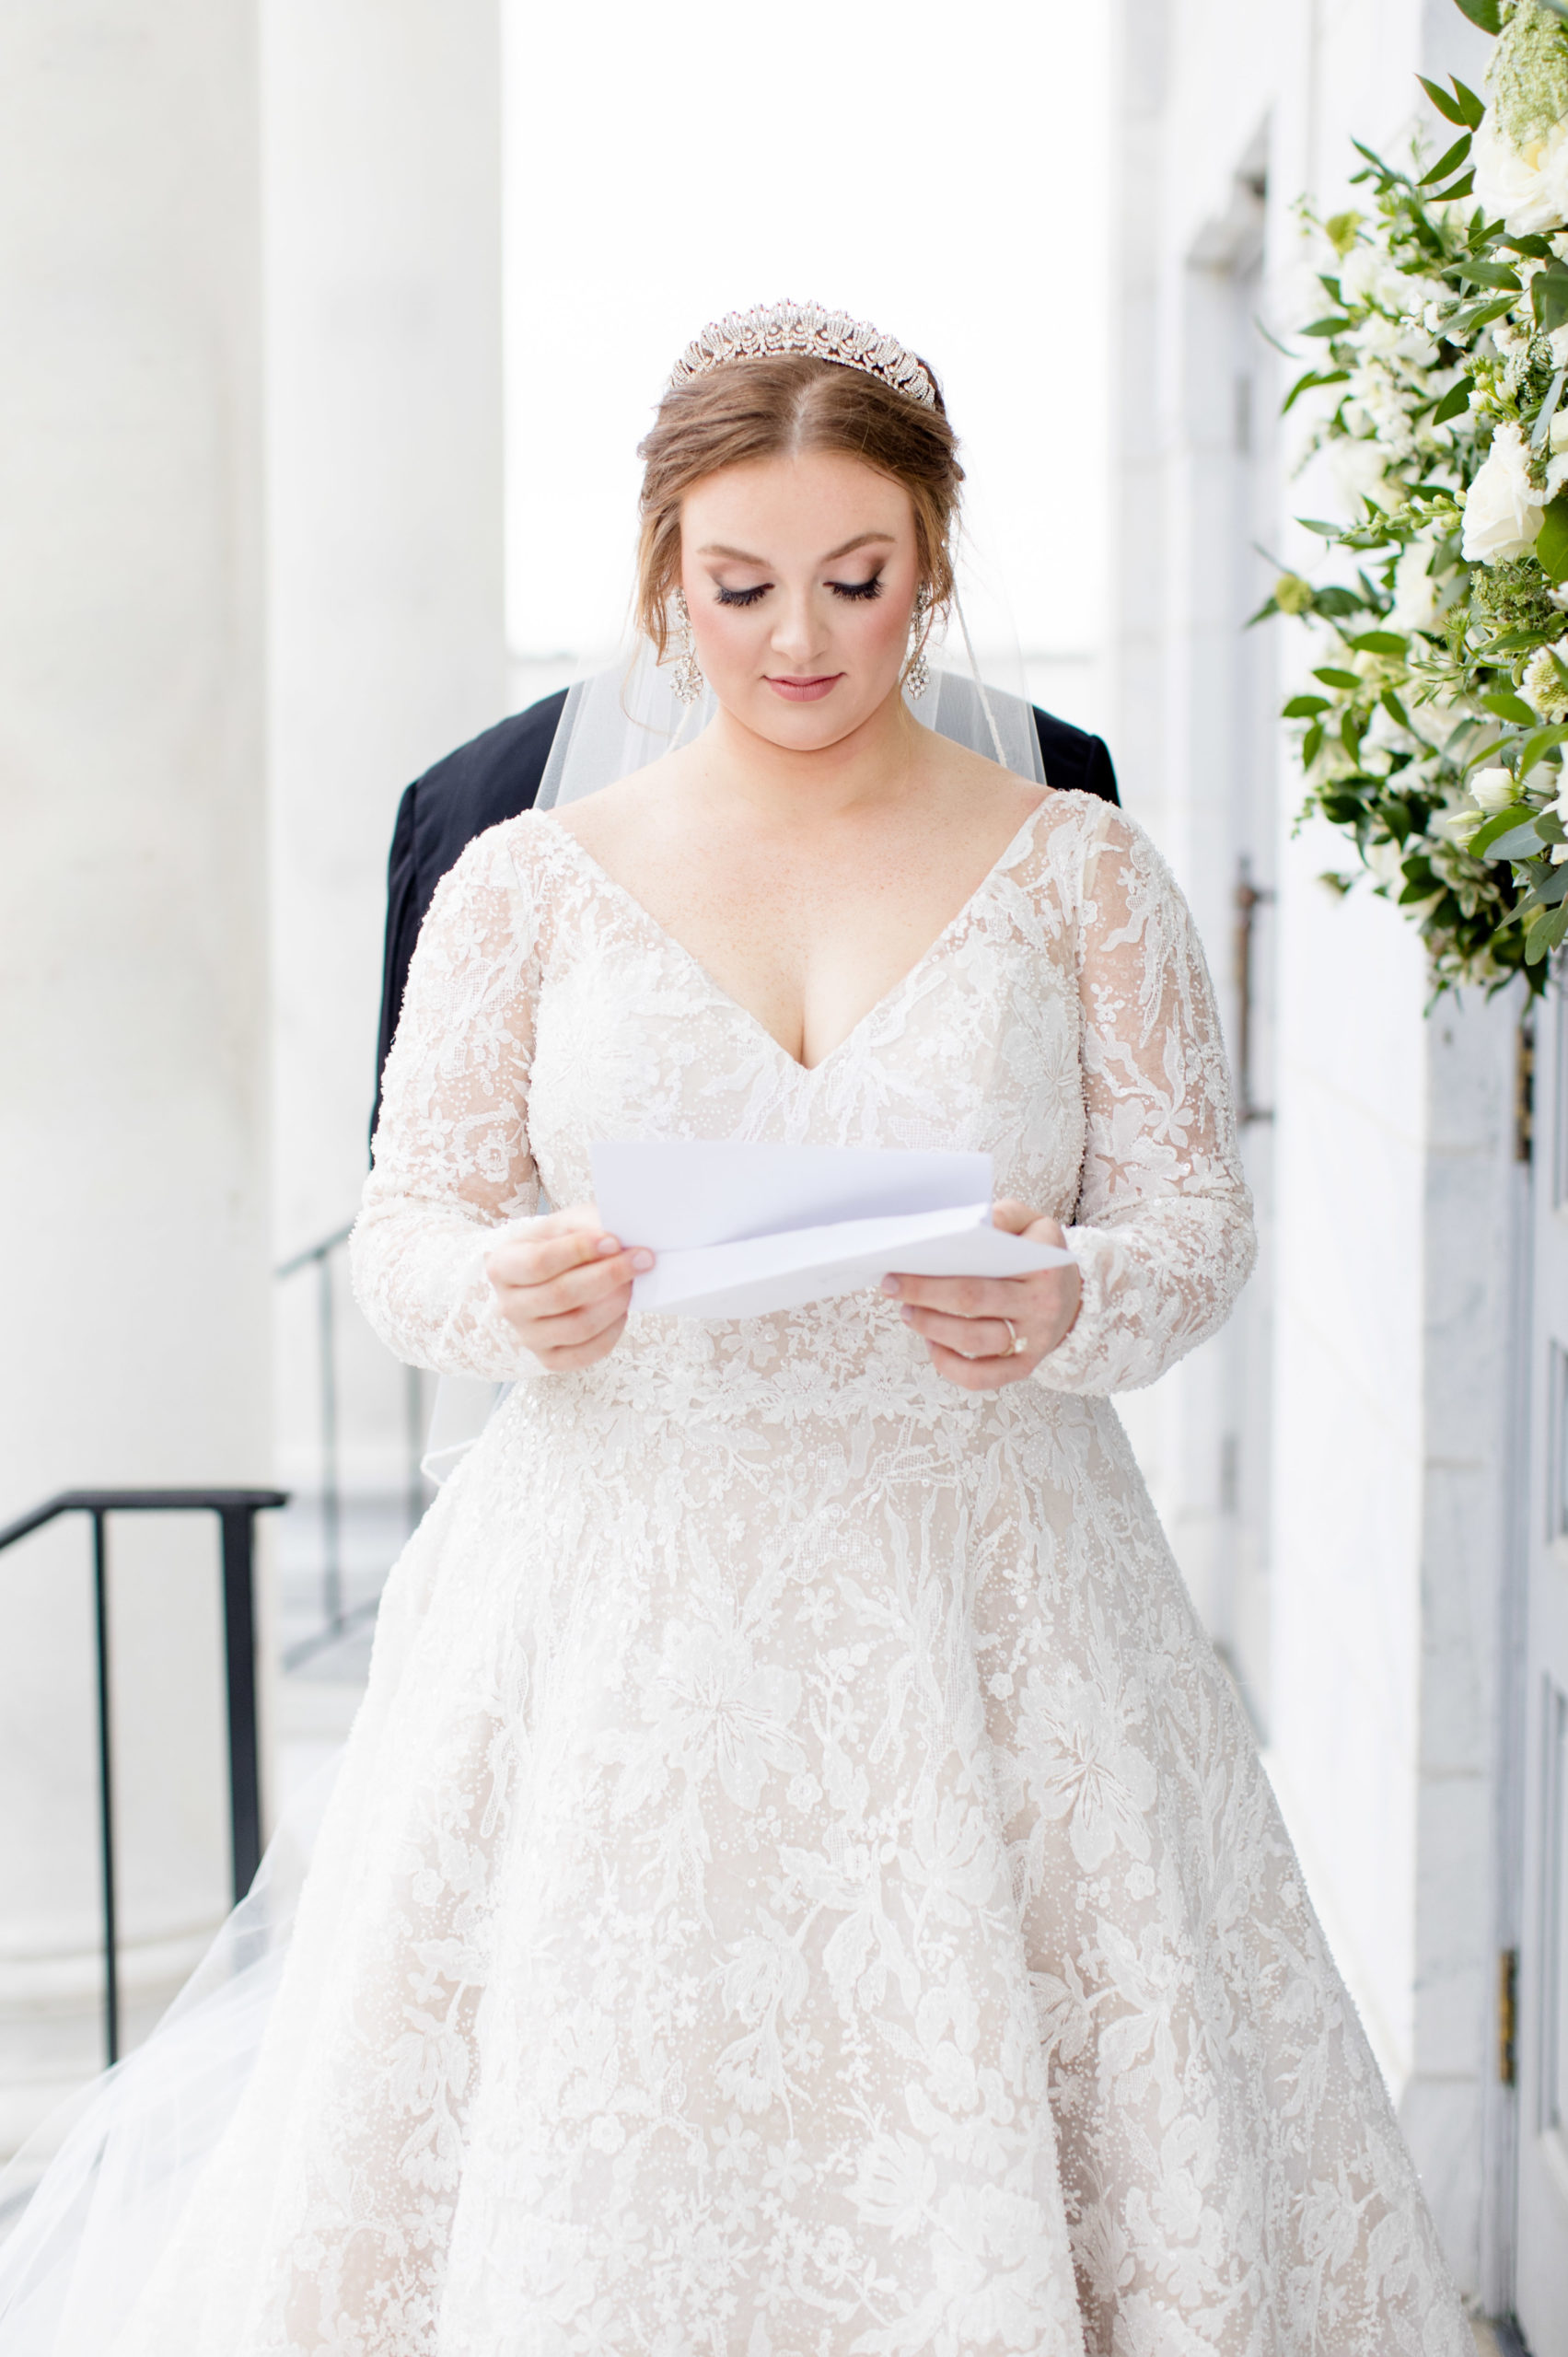 Bride reads letter from groom.